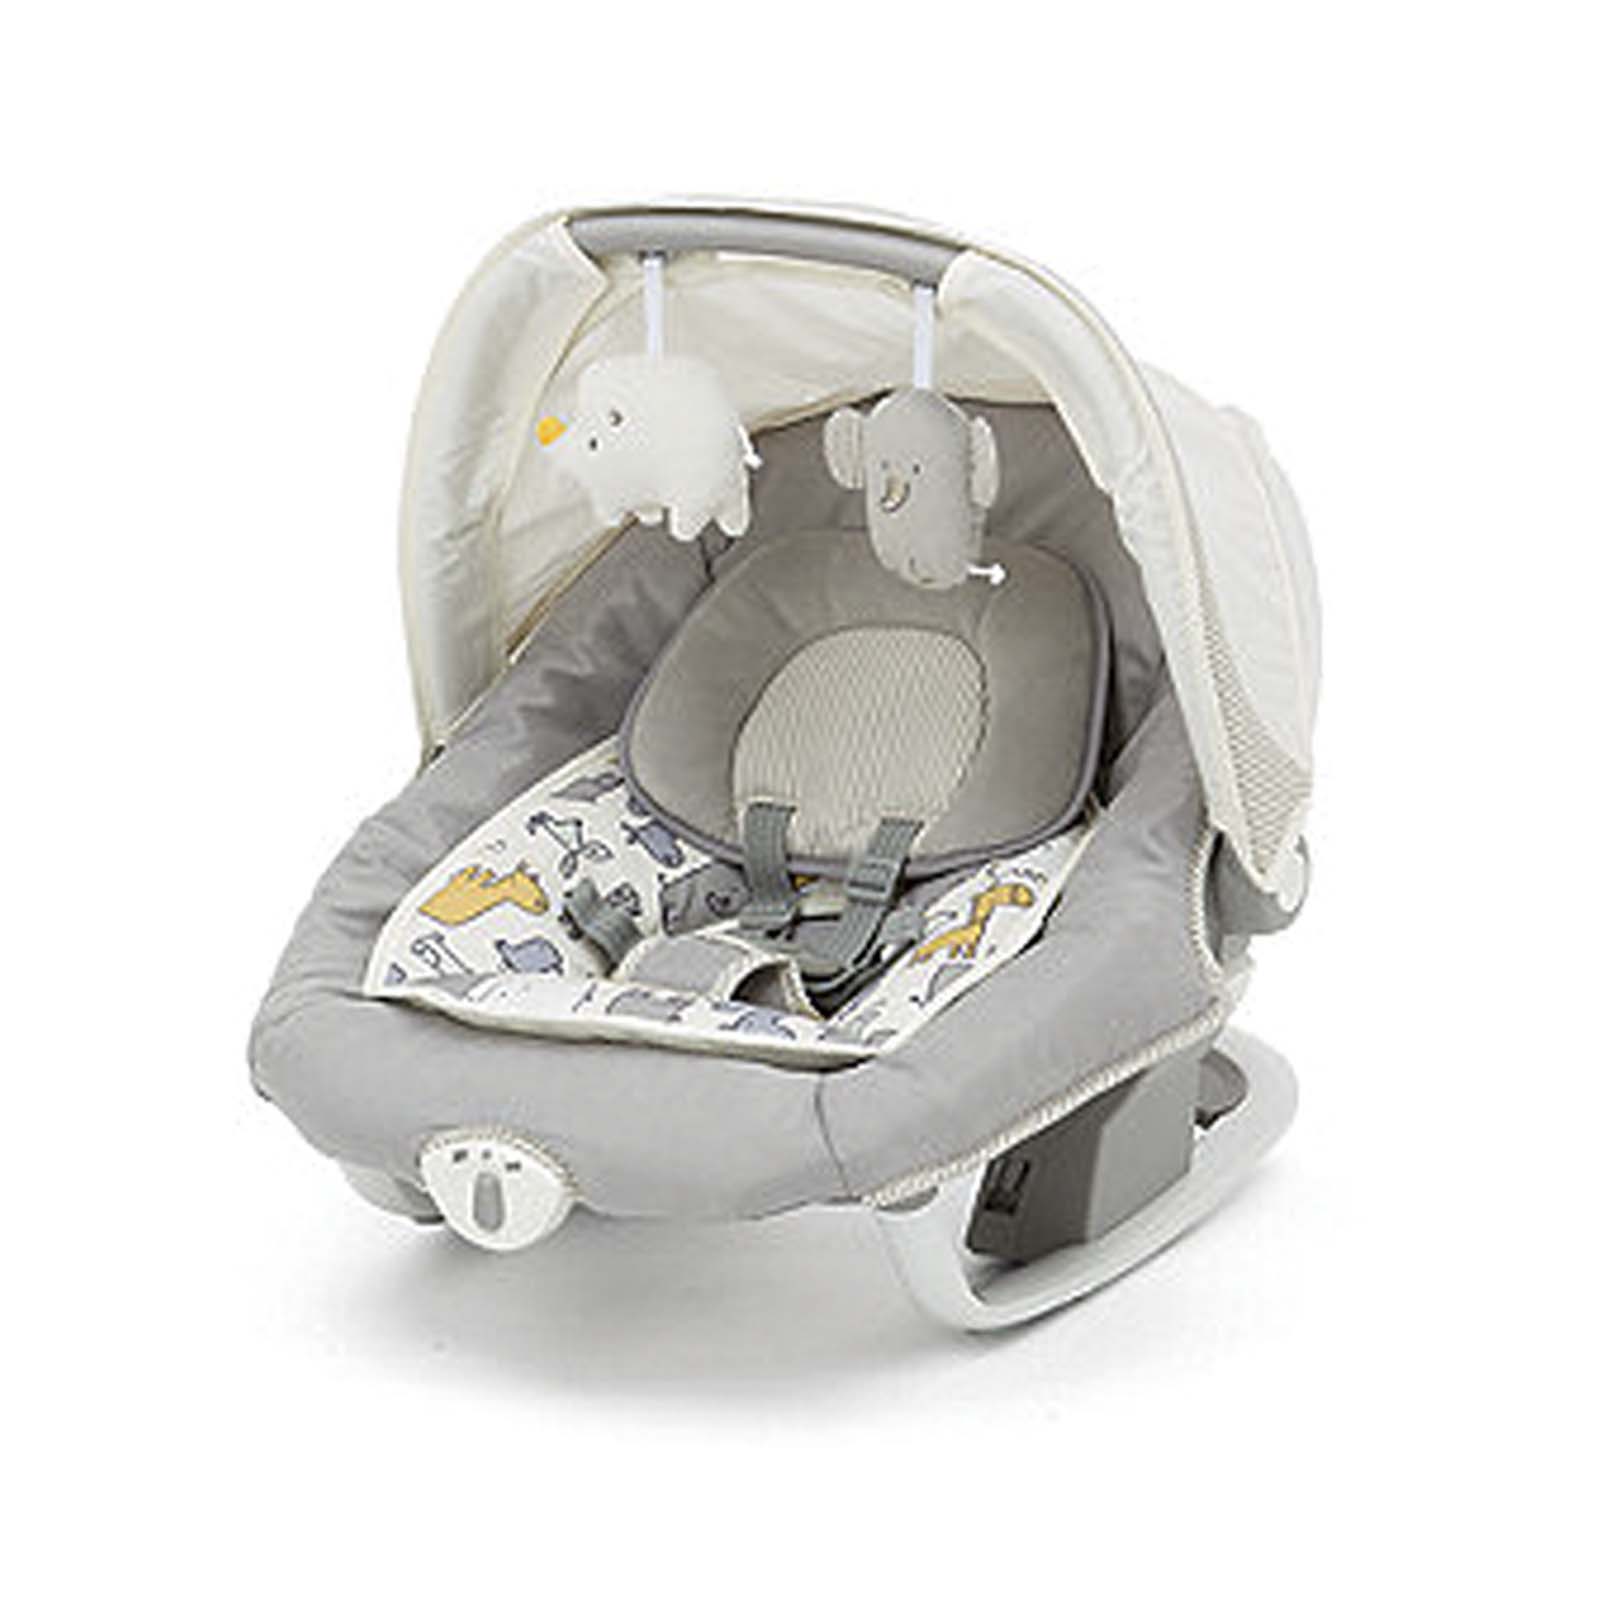 mothercare joie swing